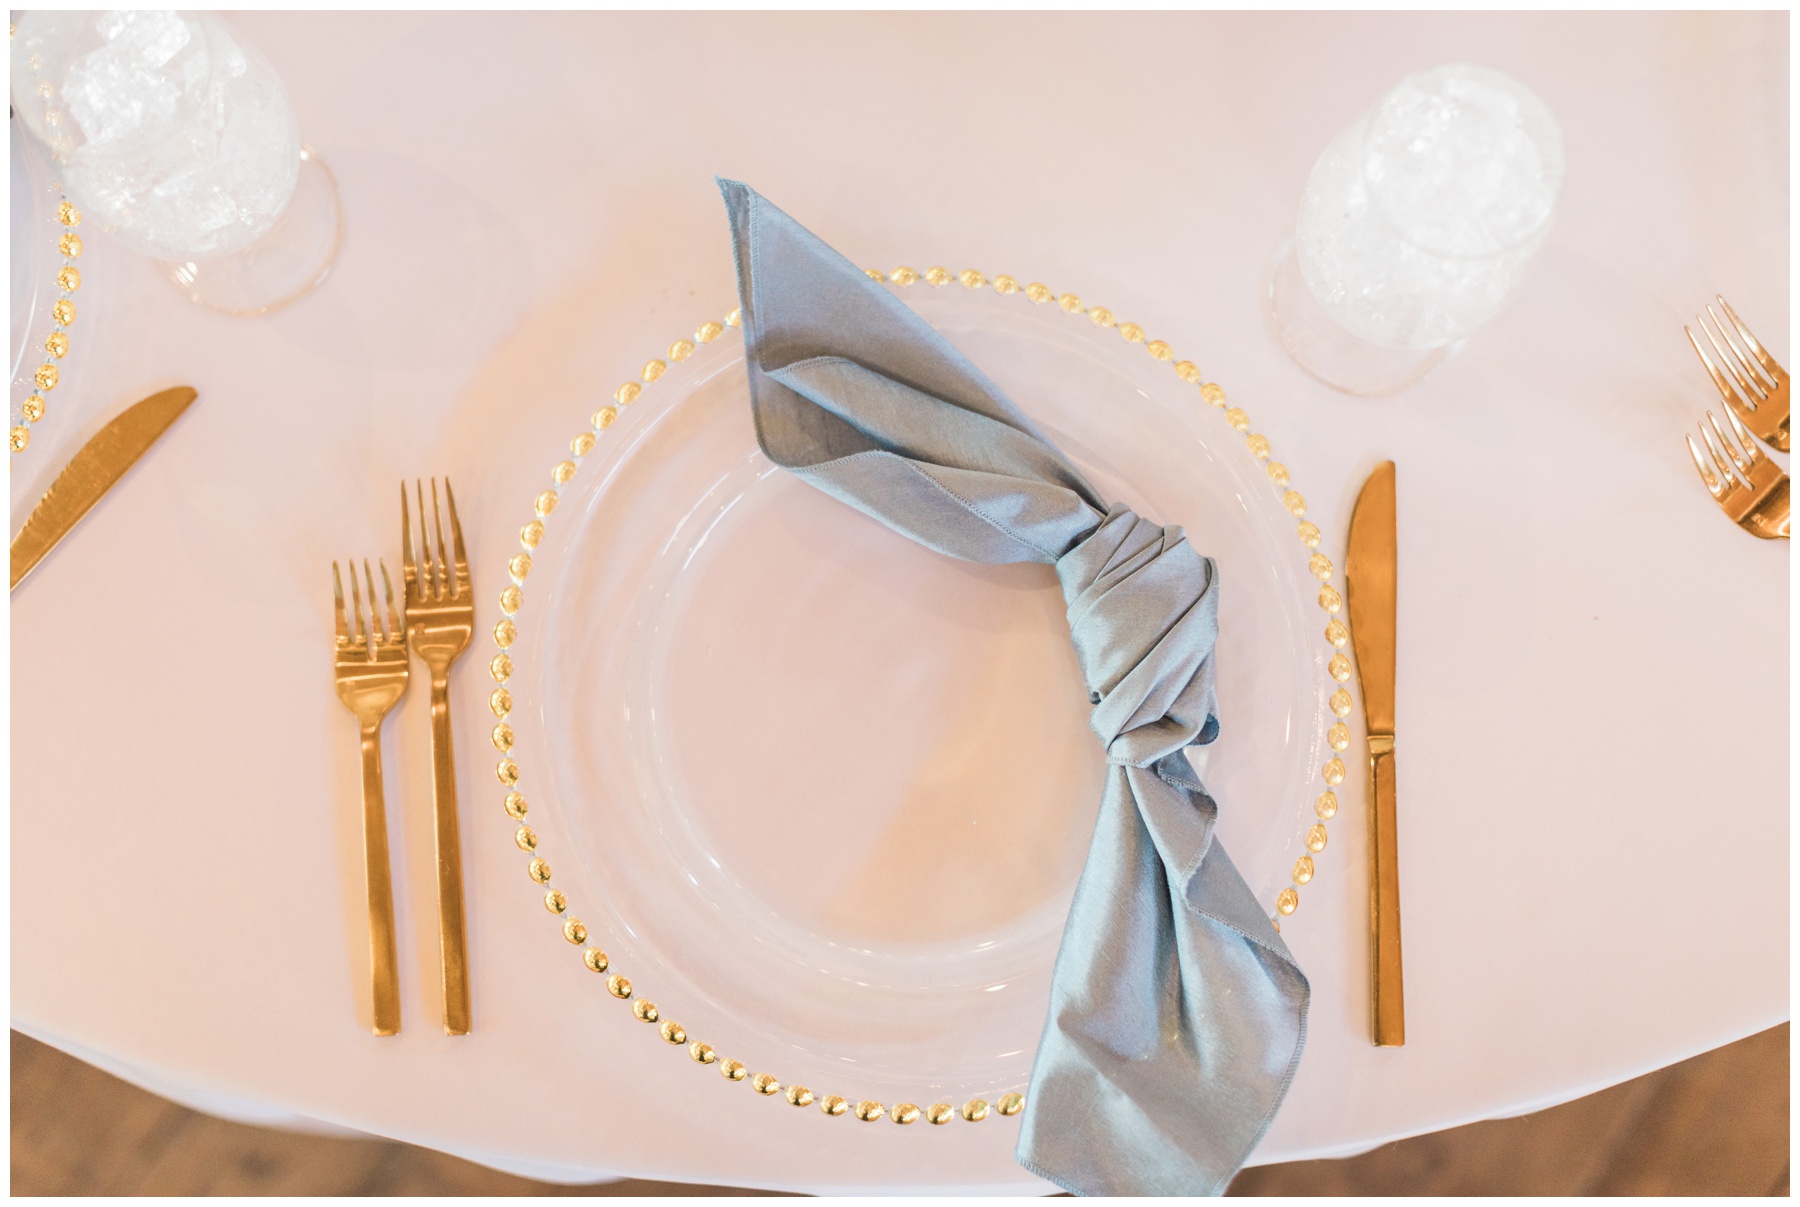 White satin tablecloths, powder blue satin napkins, and gold beaded chargers for a spring wedding reception